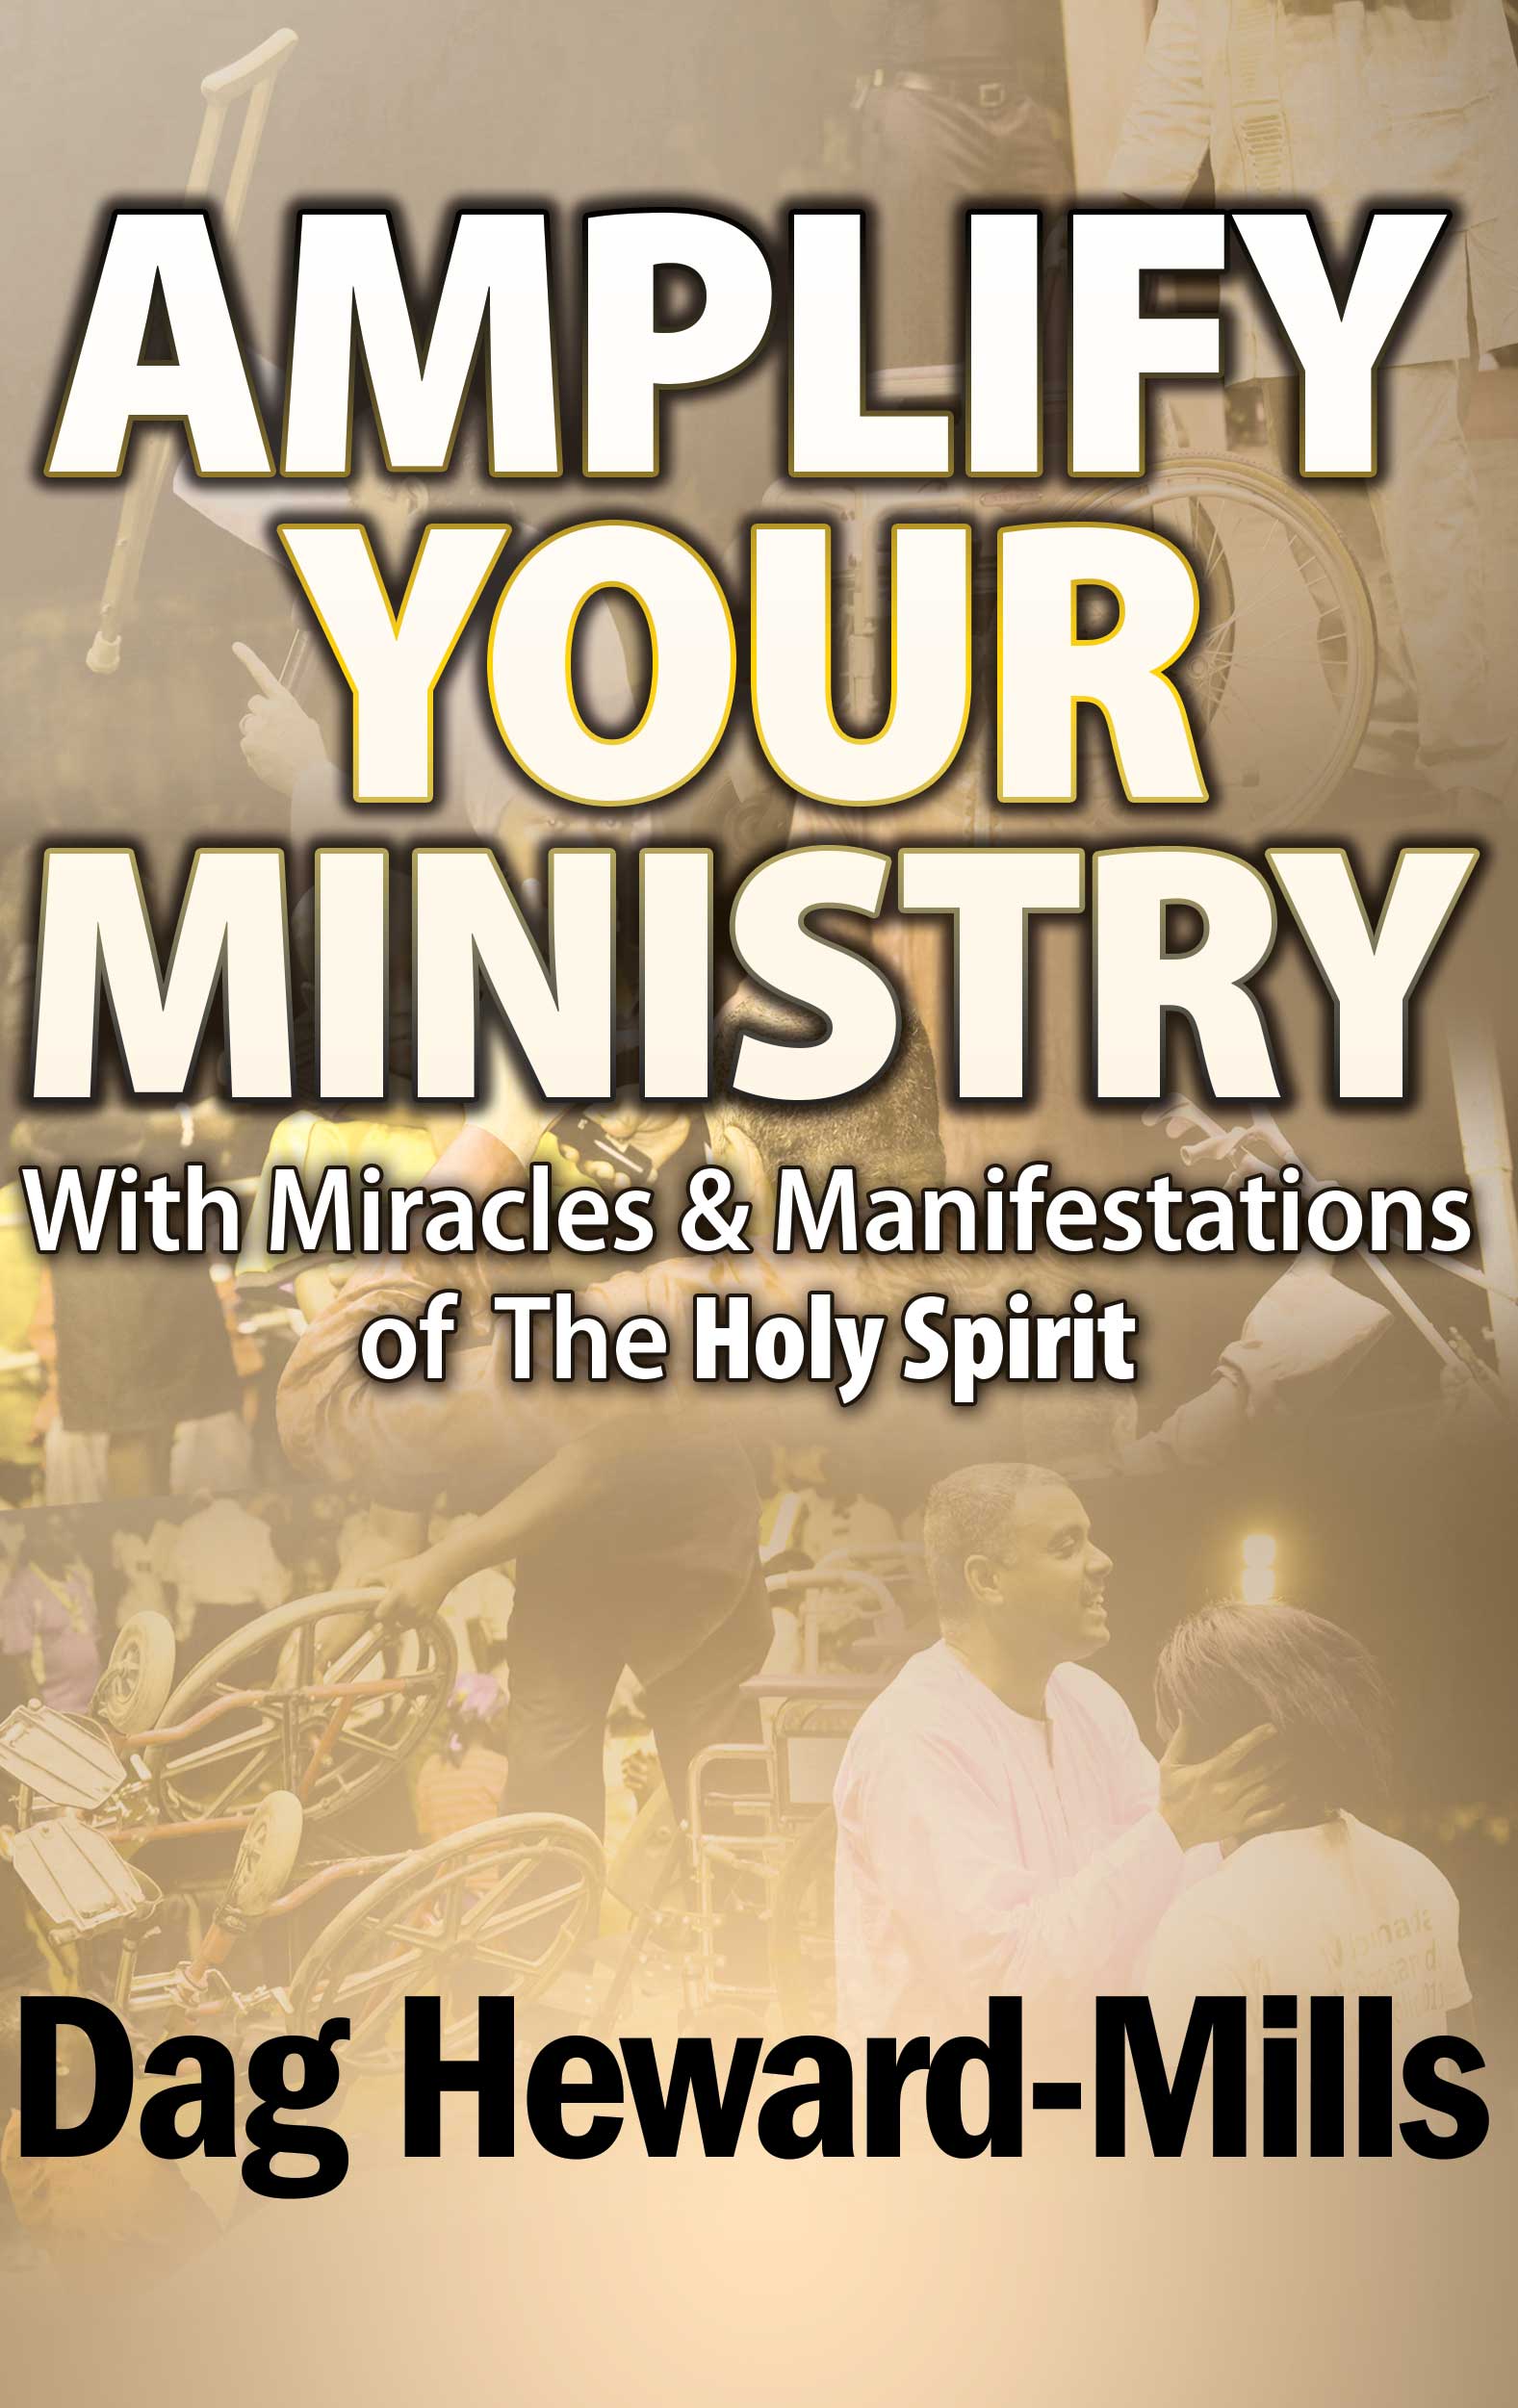 Amplify-Your-Ministry-front